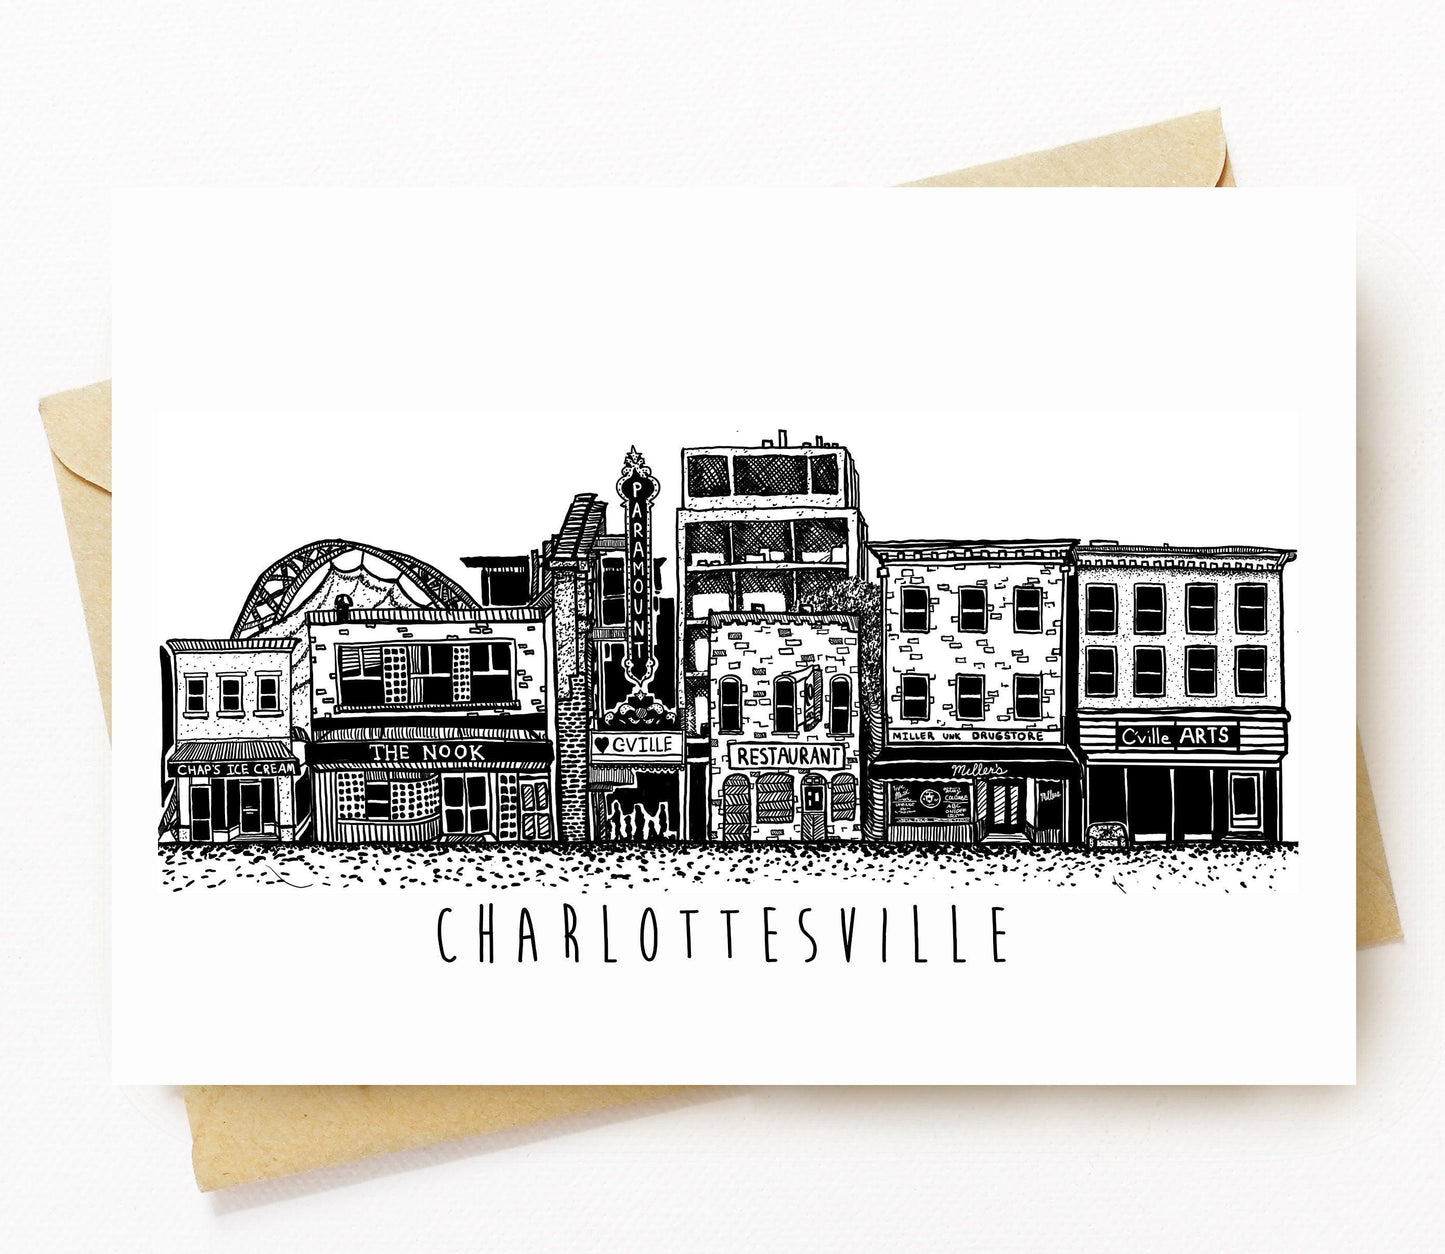 BellavanceInk: Greeting Card Local Shops On The Downtown Mall of Charlottesville Virginia 5 x 7 Inches - BellavanceInk